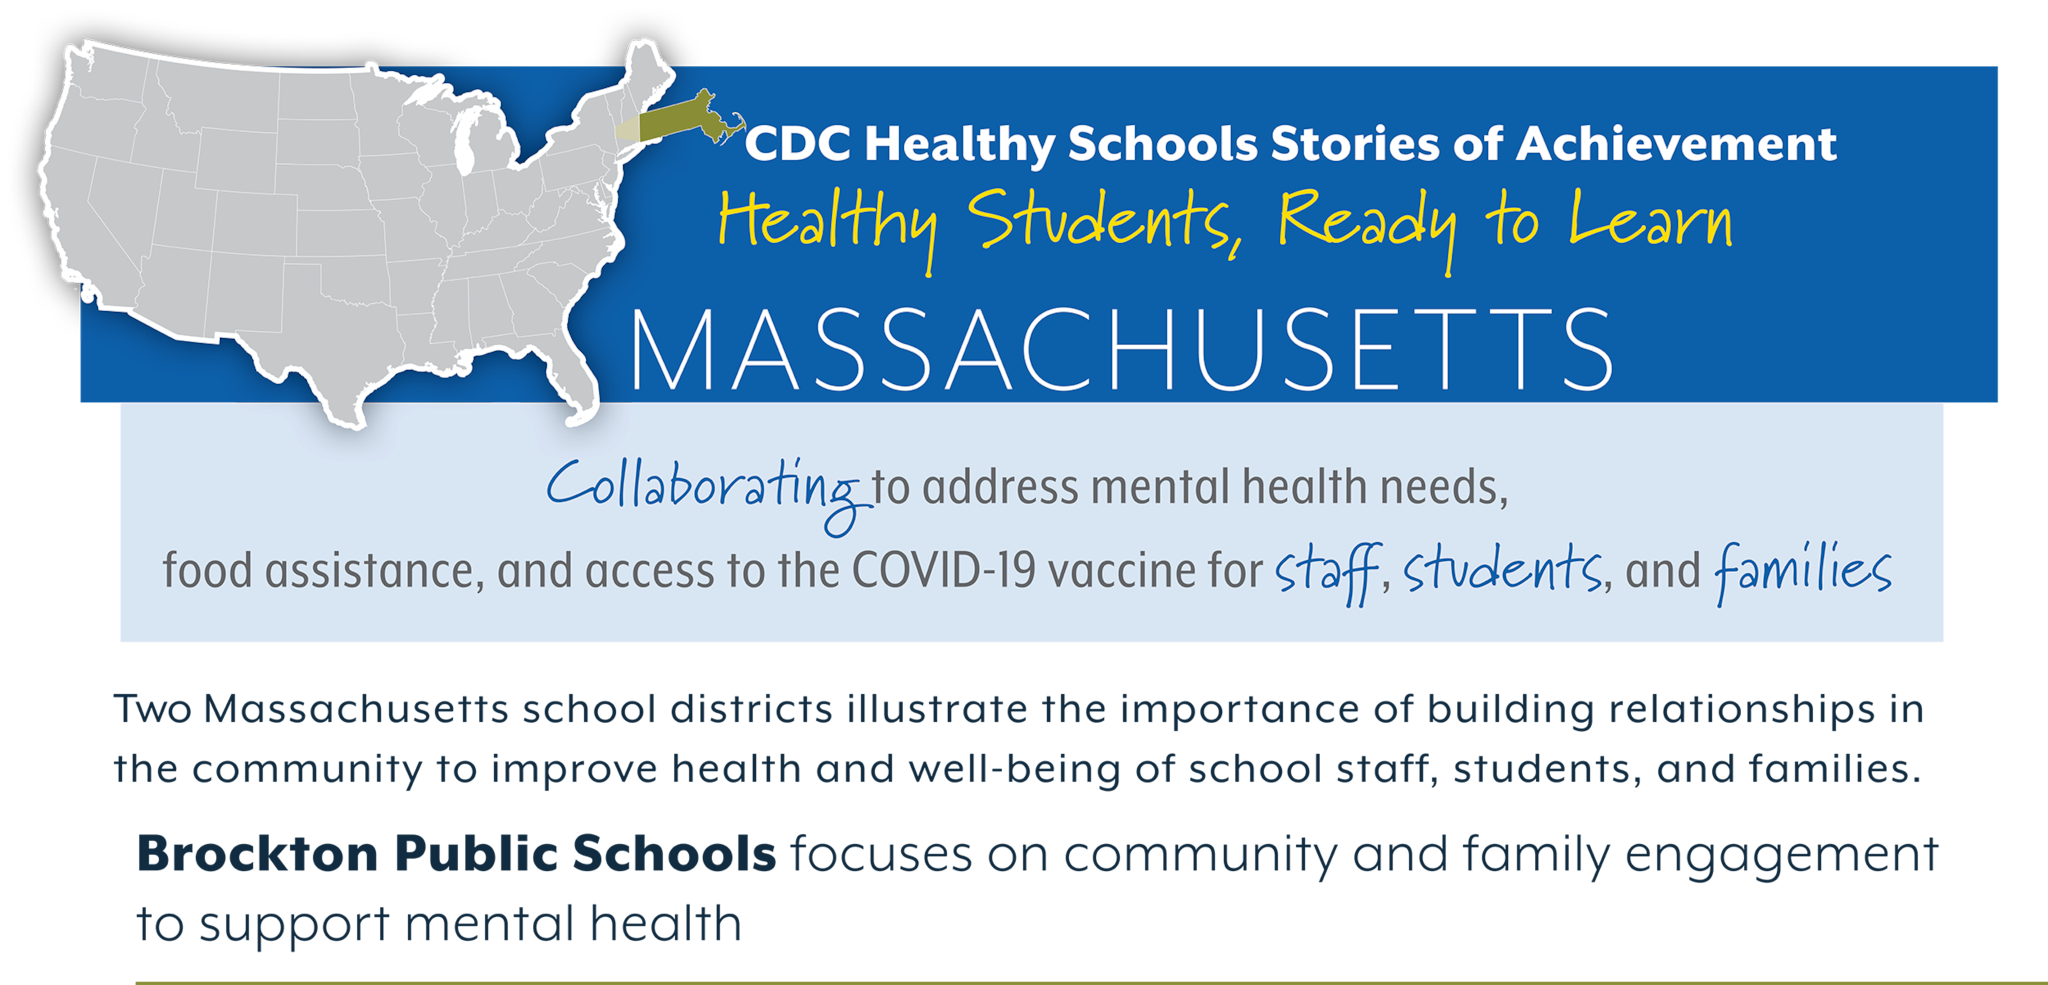 CDC Healthy Schools Stories of Achievement  Healthy Students, Ready to Learn  MASSACHUSETTS Collaboratng to address mental health needs,  food assistance, and access to the COVID-19 vaccine for staf, students, and families  Two Massachusetts school districts illustrate the importance of building relationships in  the community to improve health and well-being of school staff, students, and families.  Brockton Public Schools focuses on community and family engagement  to support mental health